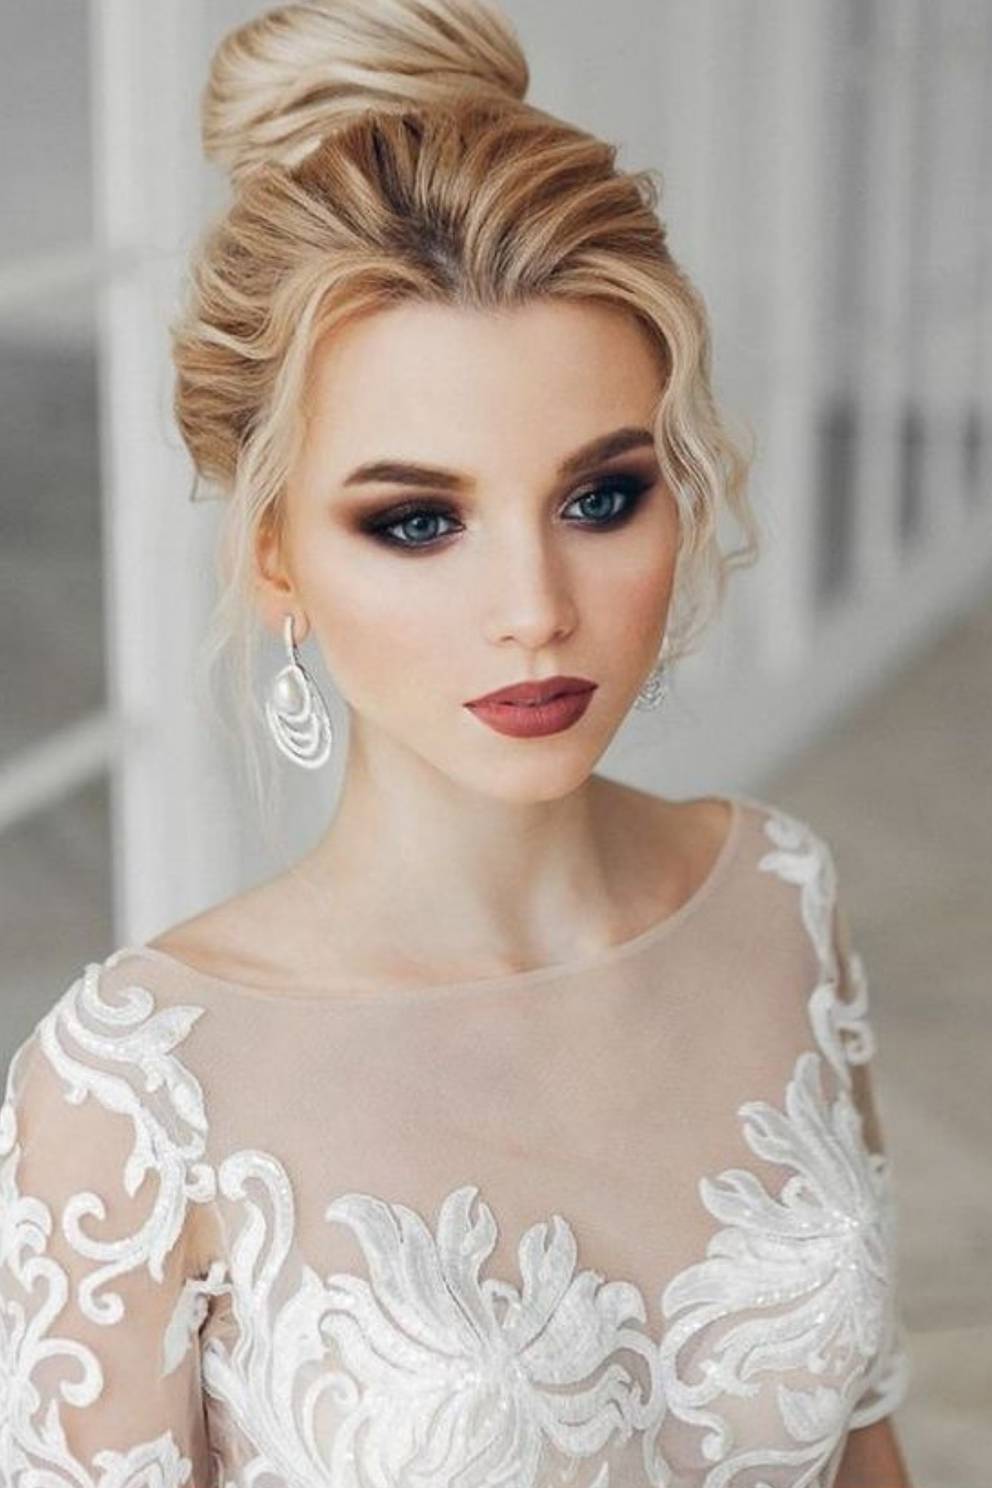 20 Of The Most Pinned Bridal Beauty Looks Of 2019 So Far - NZ Herald